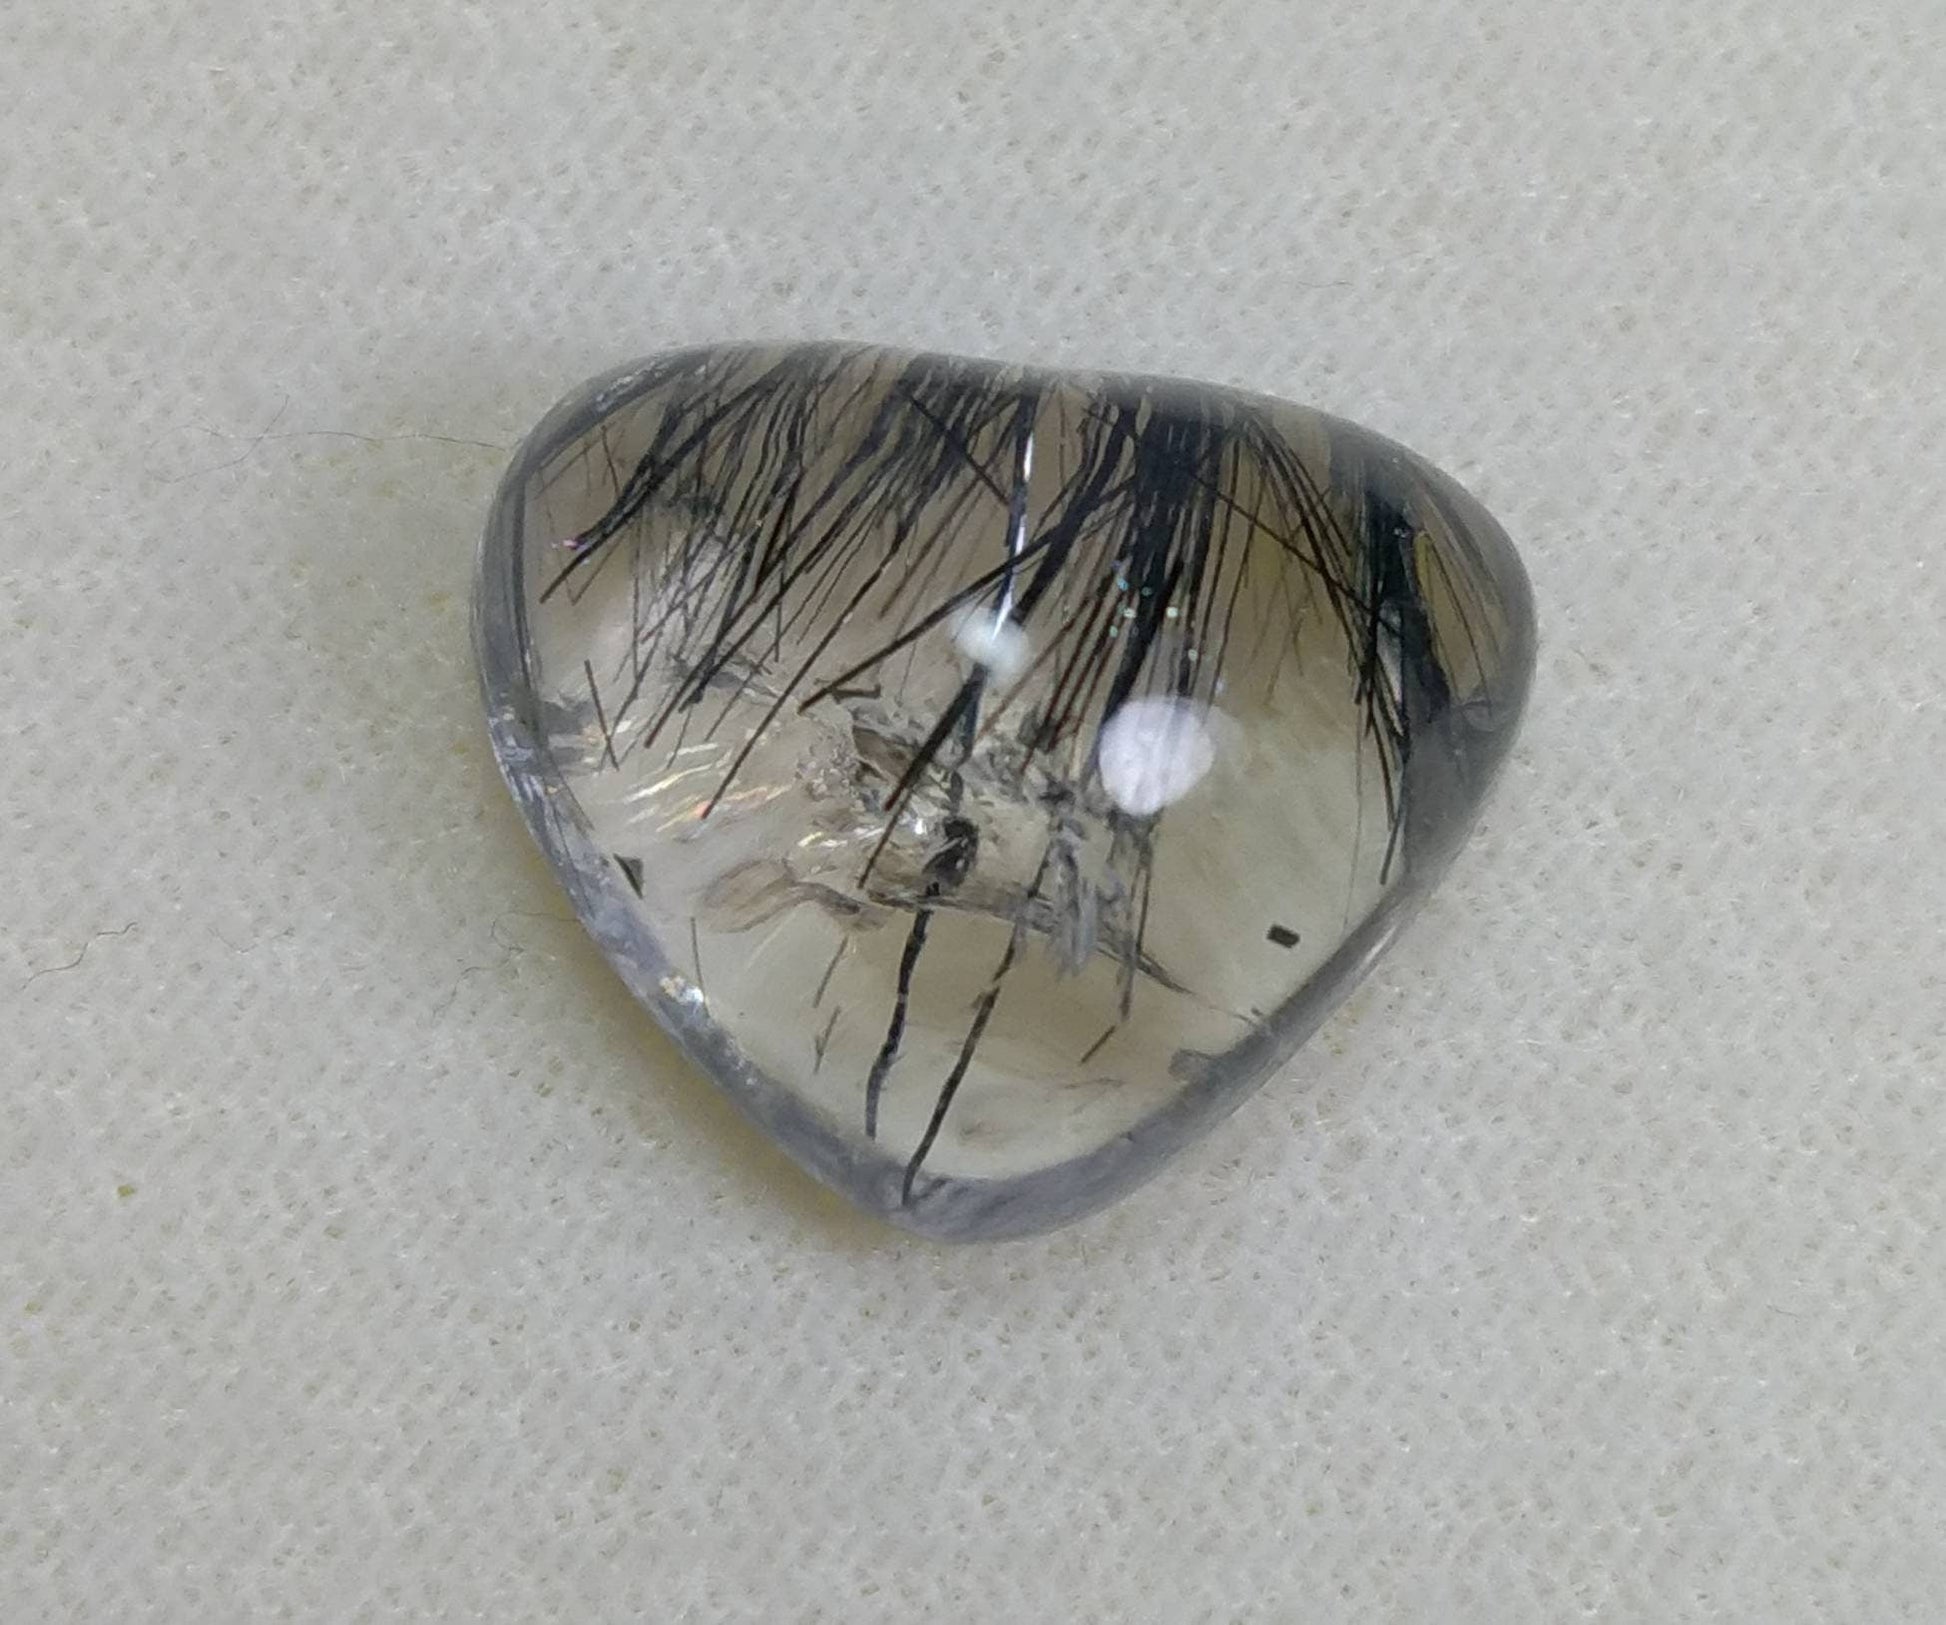 ARSAA GEMS AND MINERALSNatural fine quality beautiful 17 Carat heart shape black Tourmaline included Quartz Cabochon - Premium  from ARSAA GEMS AND MINERALS - Just $15.00! Shop now at ARSAA GEMS AND MINERALS